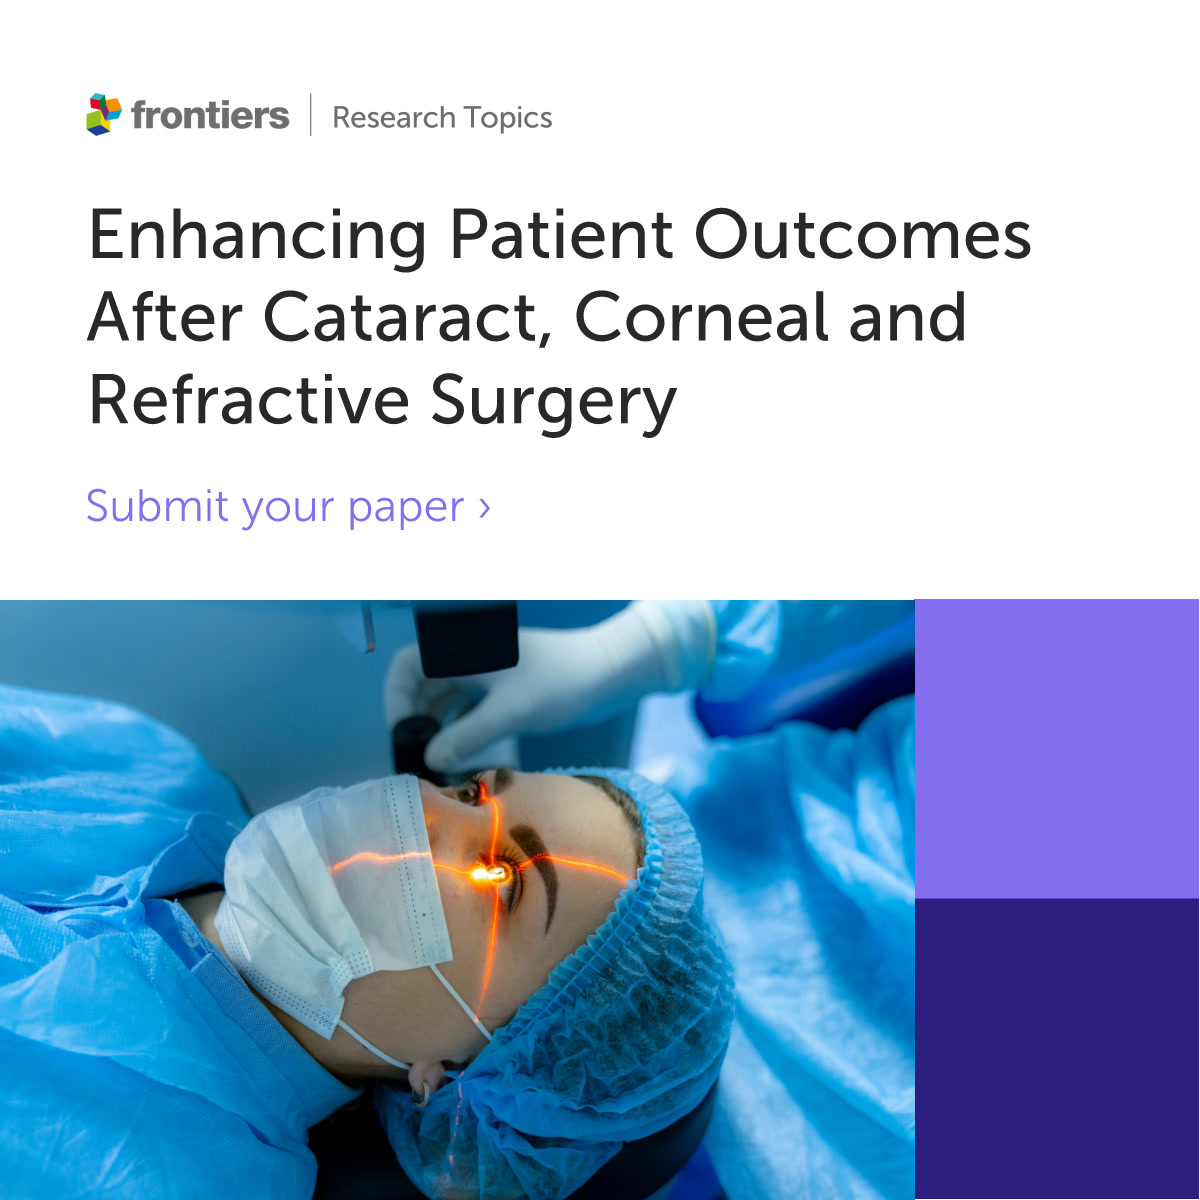 📢 Call for papers! Submissions are open for 'Enhancing Patient Outcomes After Cataract, Corneal and Refractive Surgery' Edited by Mayank Nanavaty and Ramin Khoramnia Contribute or find out more ➡️ fro.ntiers.in/63269